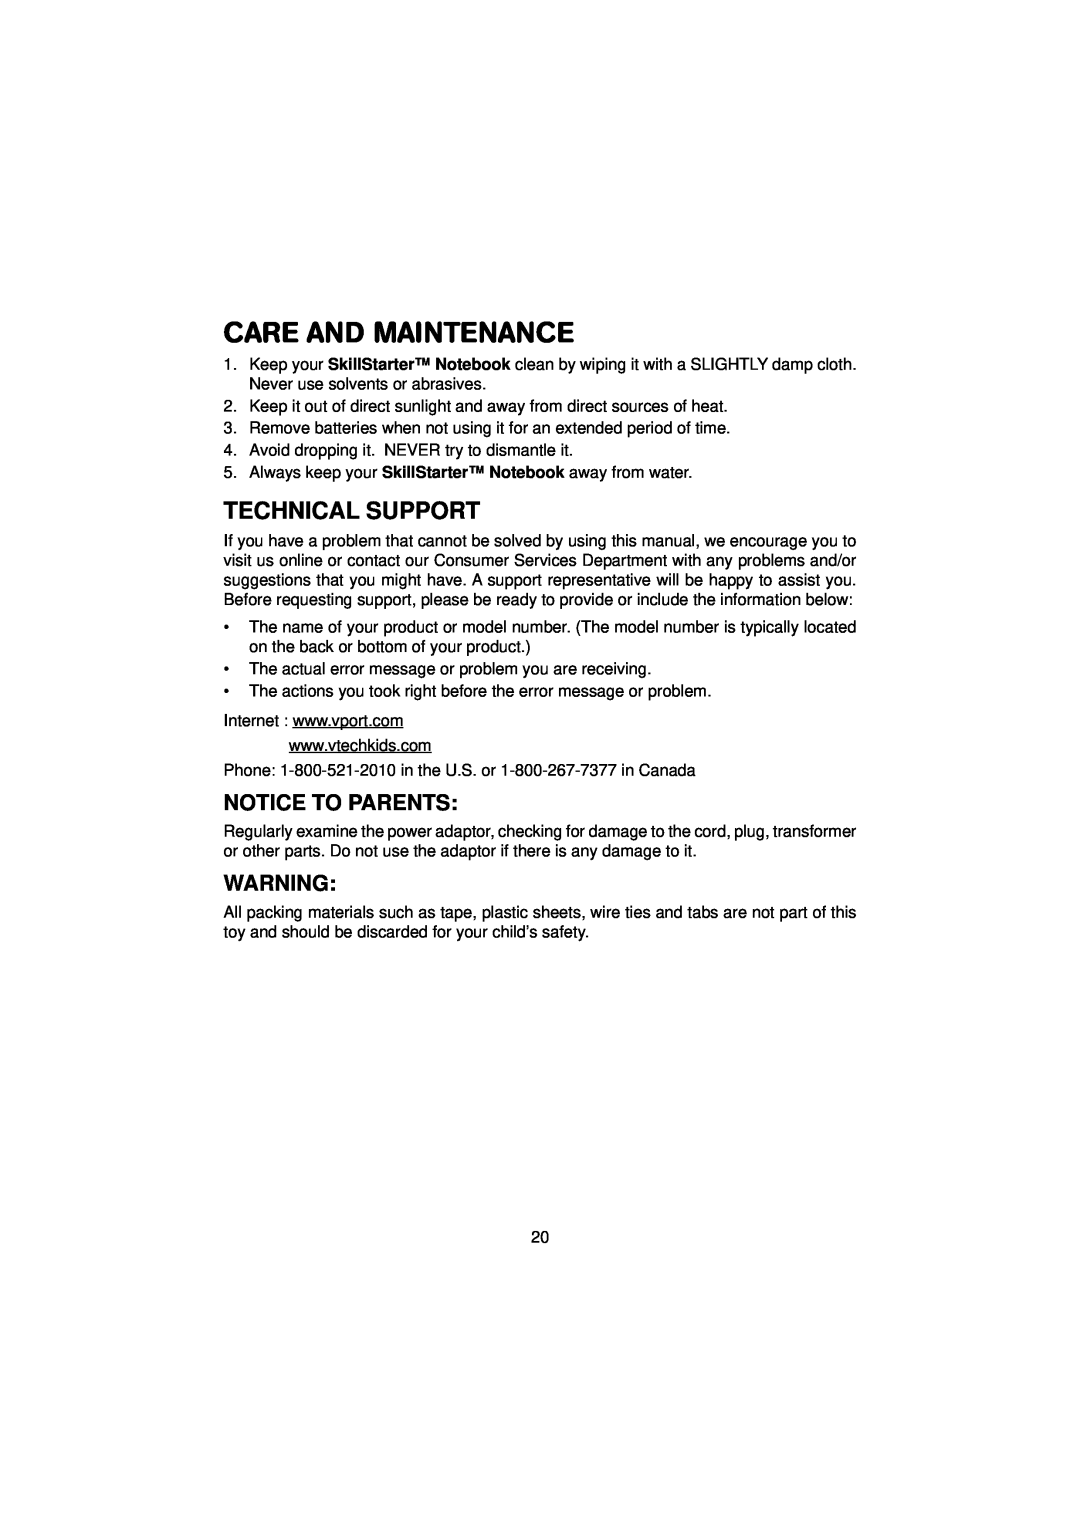 VTech SkillStarter Notebook manual Care And Maintenance, Technical Support, Notice To Parents 